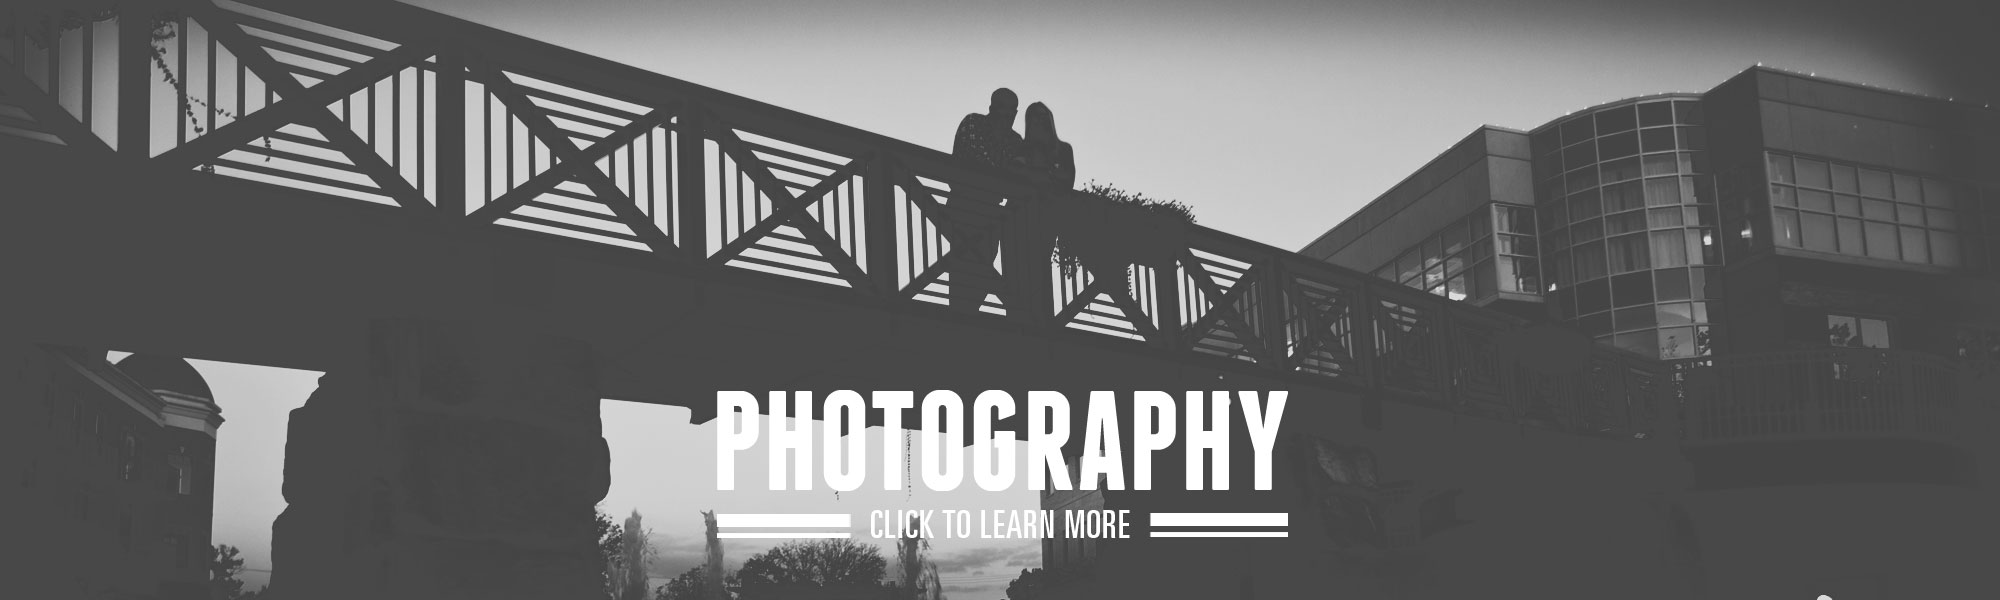 Photography - Engagement Photography, Senior Pictures, Family Portraits, Event Photography